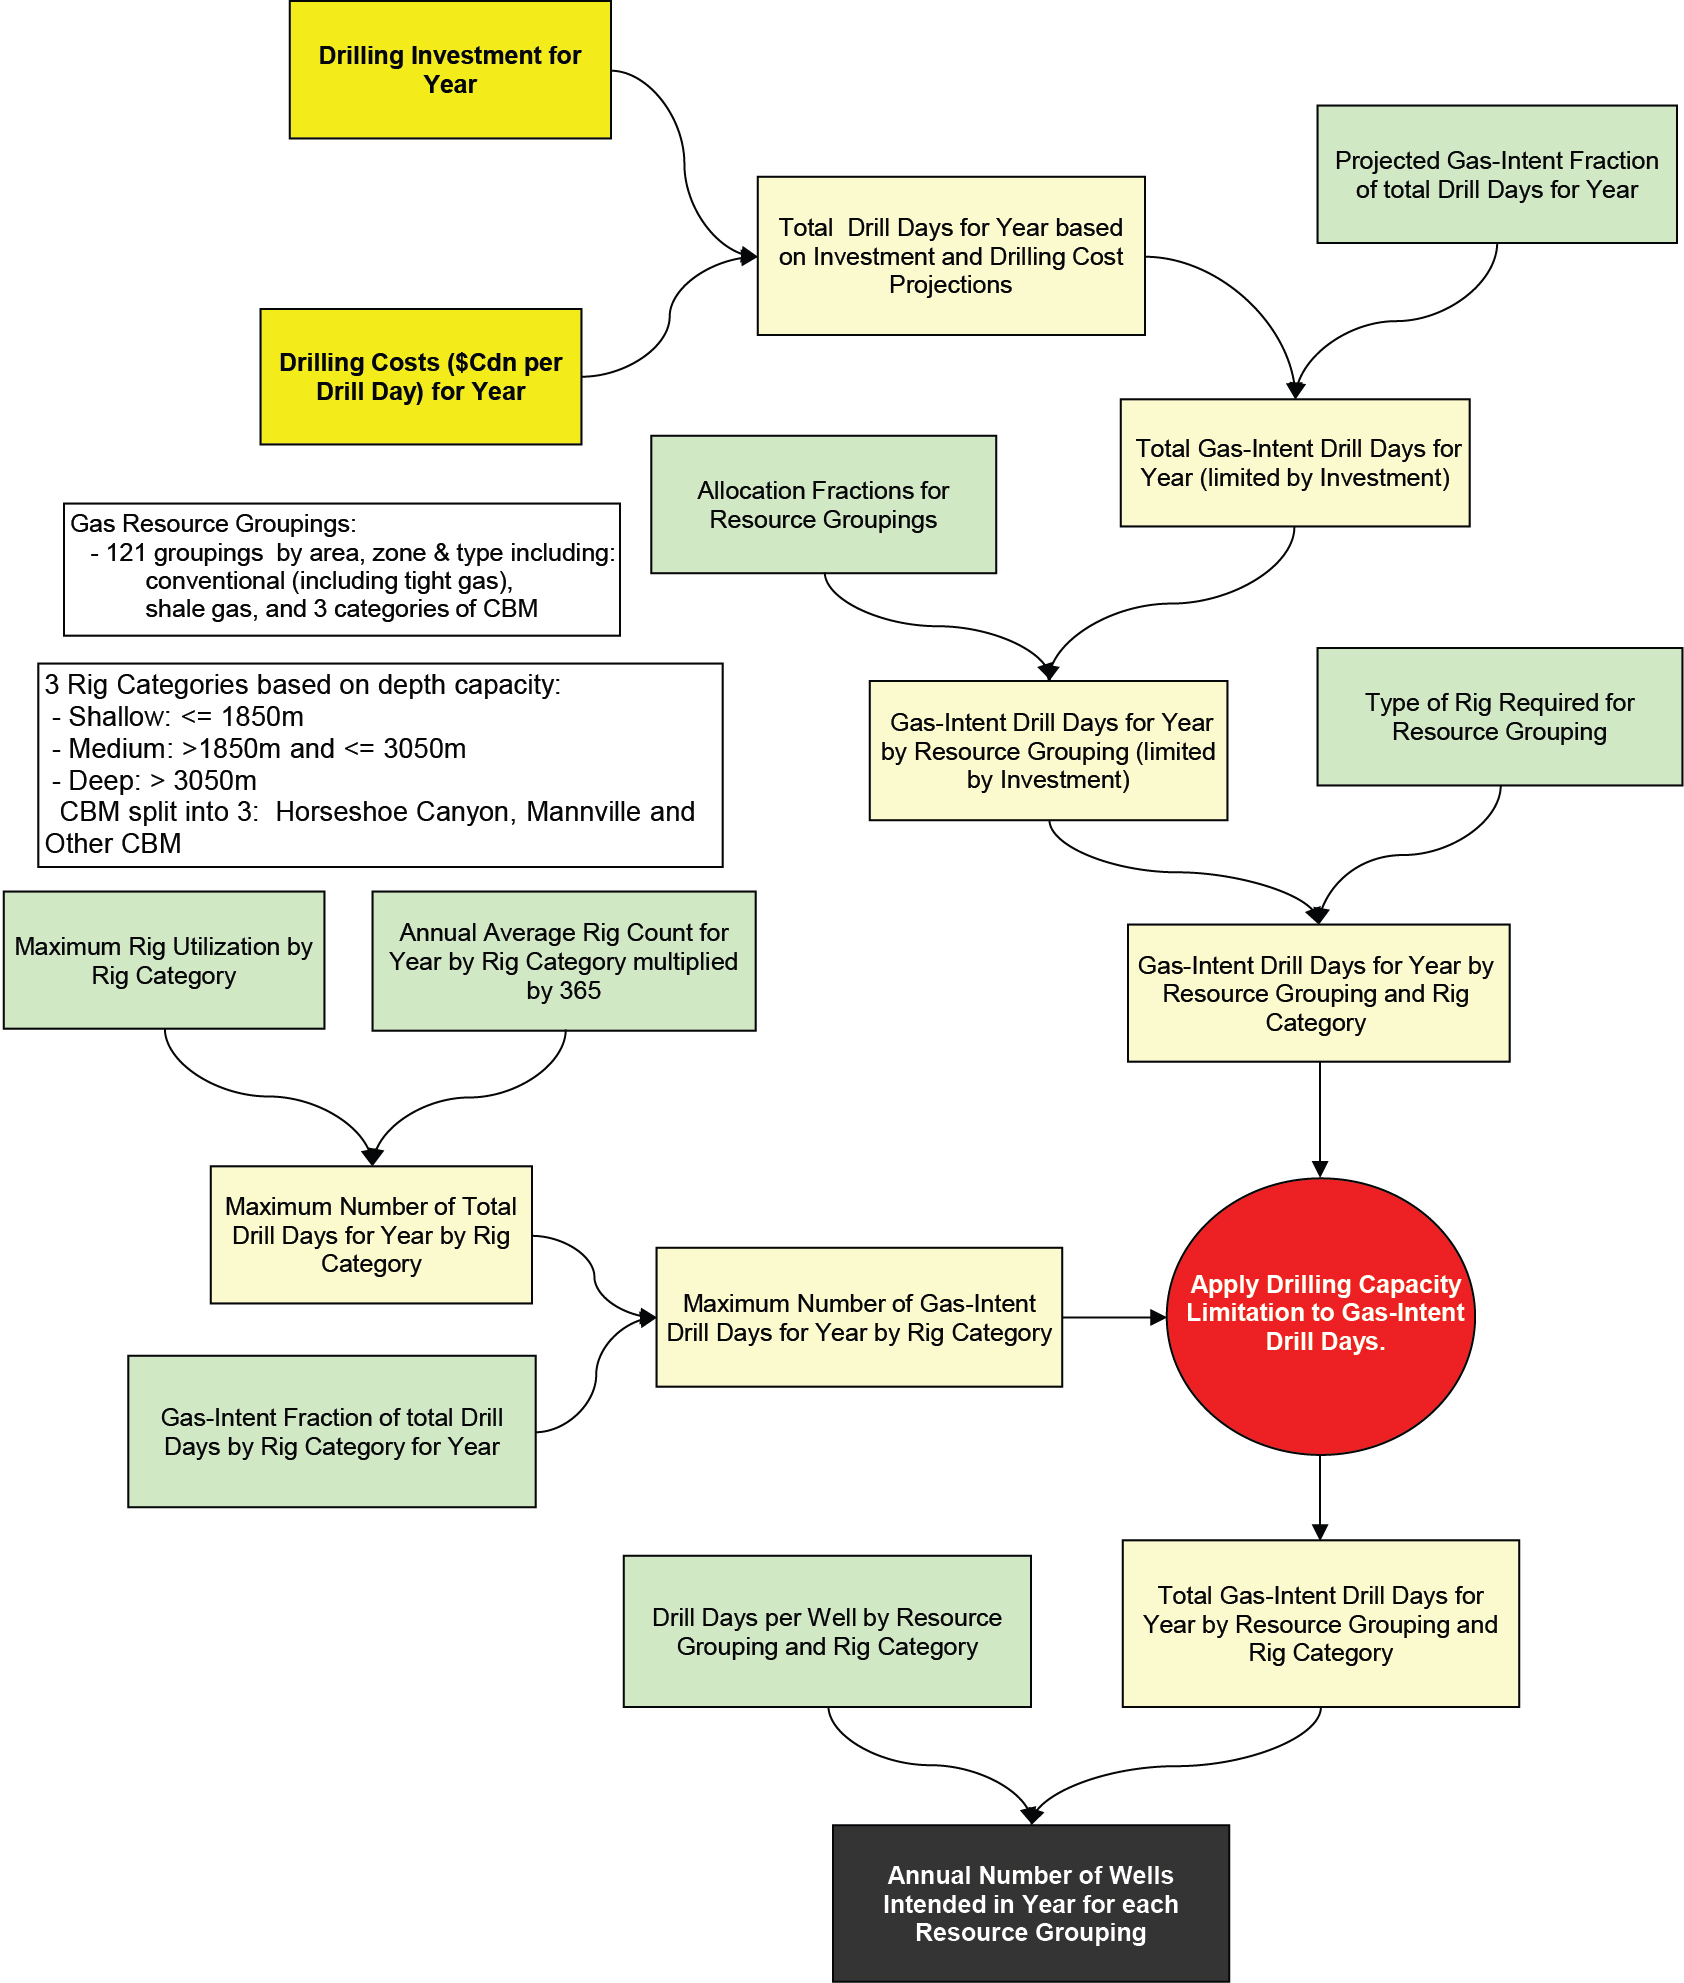 Figure A1.7 – Flowchart of Drilling Projection Methodology